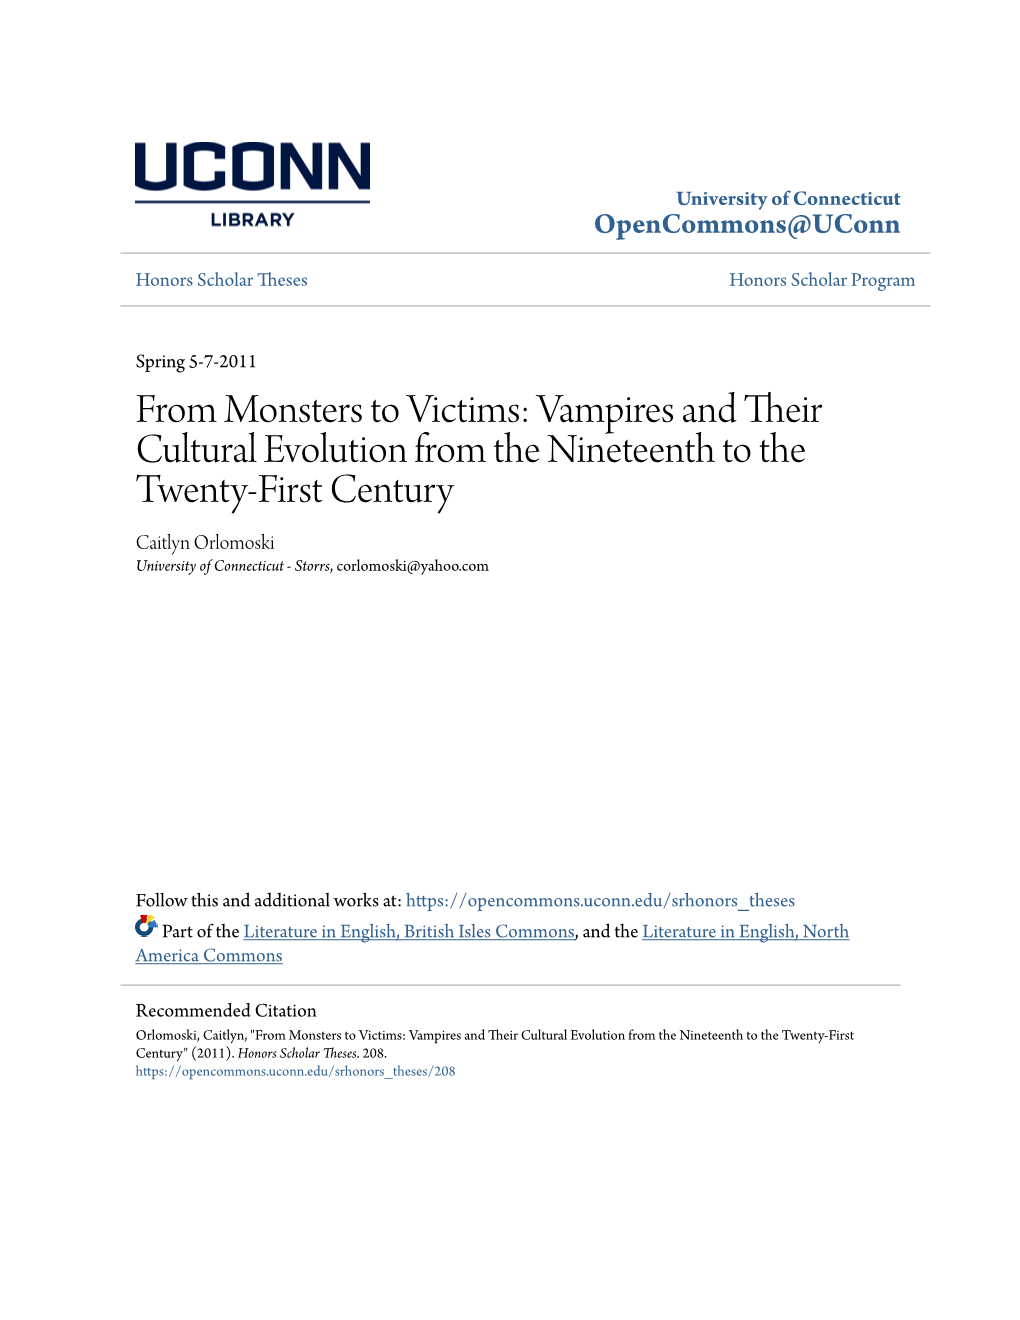 From Monsters to Victims: Vampires and Their Cultural Evolution From